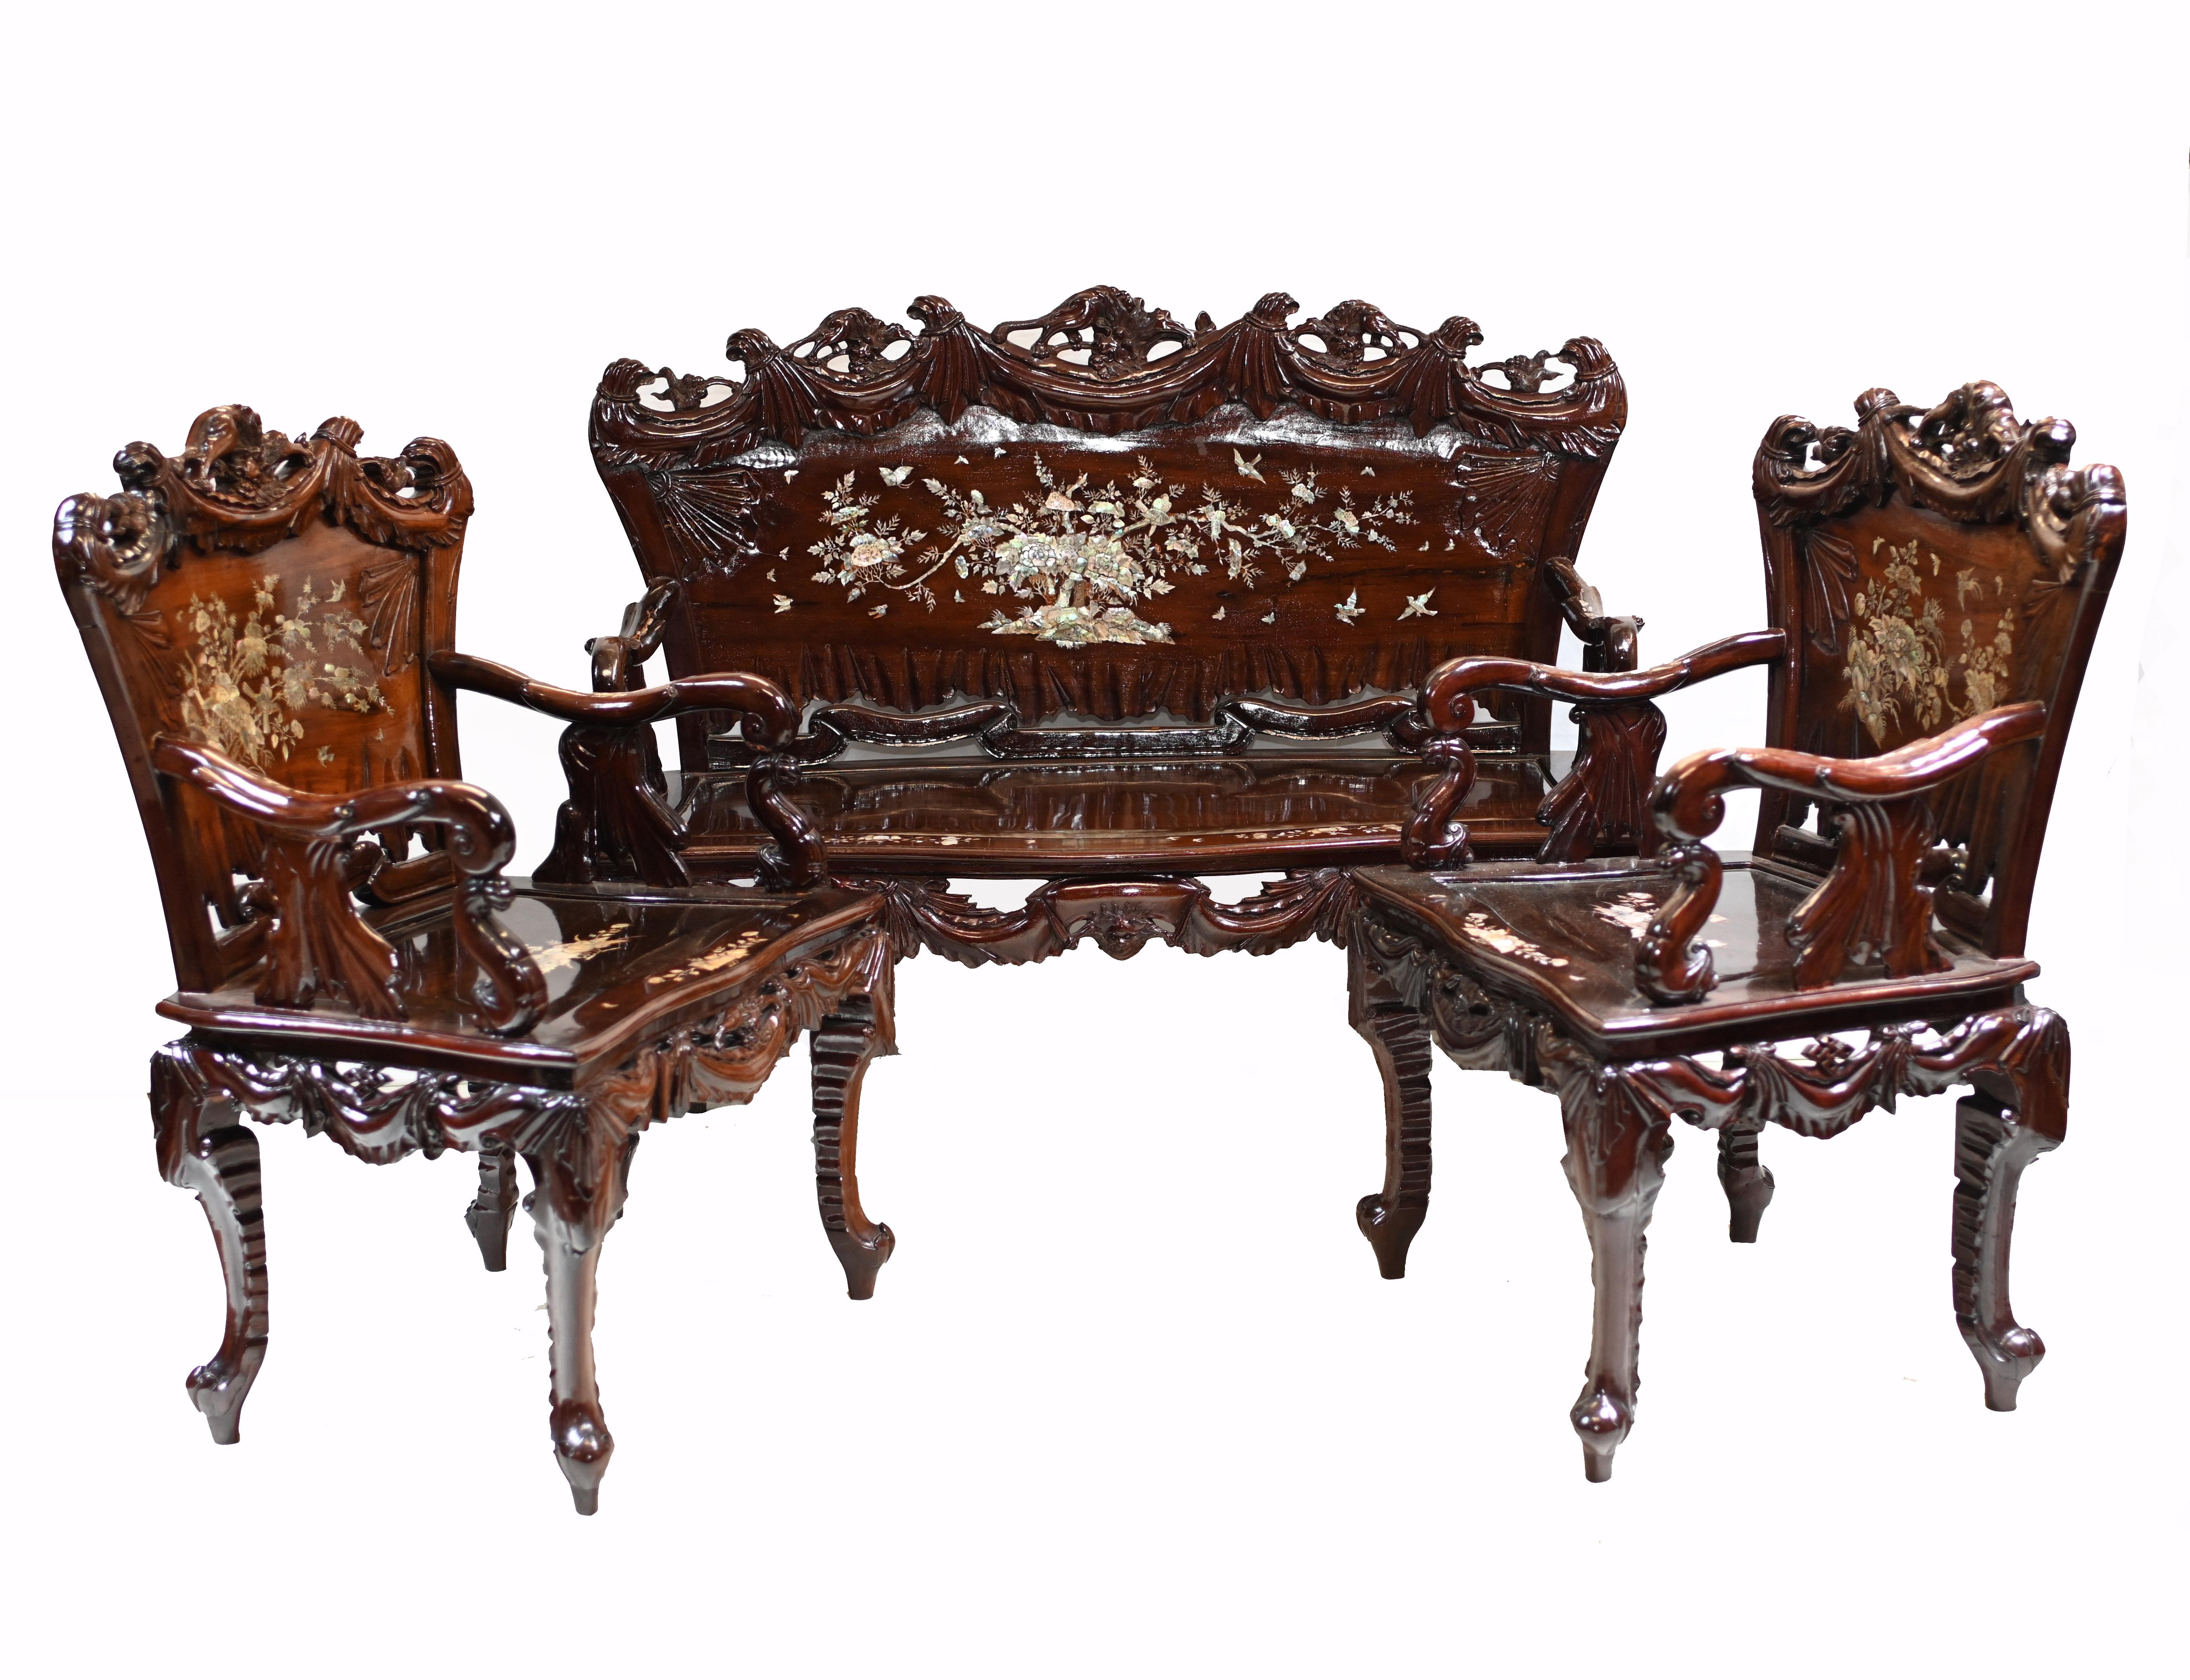 Gorgeous Chinese antique settee and two matching arm chair sets.
Profussely decorated with mother of pearl inlay work.
Includes details such as trees, birds, butterflies and other Chinese motifs
Great interiors piece and we date this set to circa